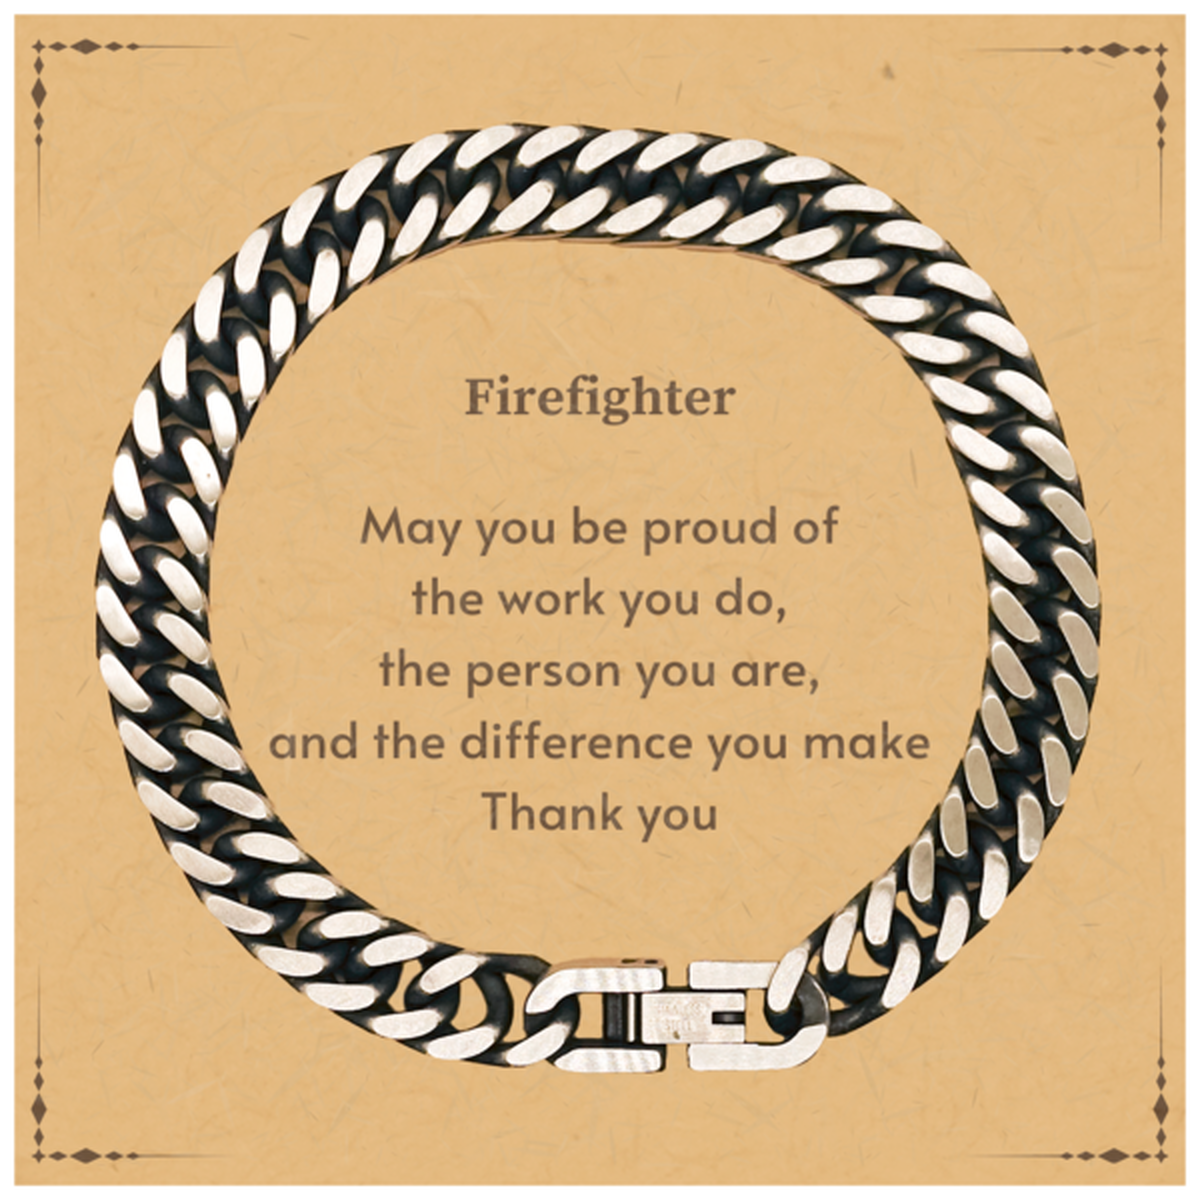 Heartwarming Cuban Link Chain Bracelet Retirement Coworkers Gifts for Firefighter, Firefighter May You be proud of the work you do, the person you are Gifts for Boss Men Women Friends